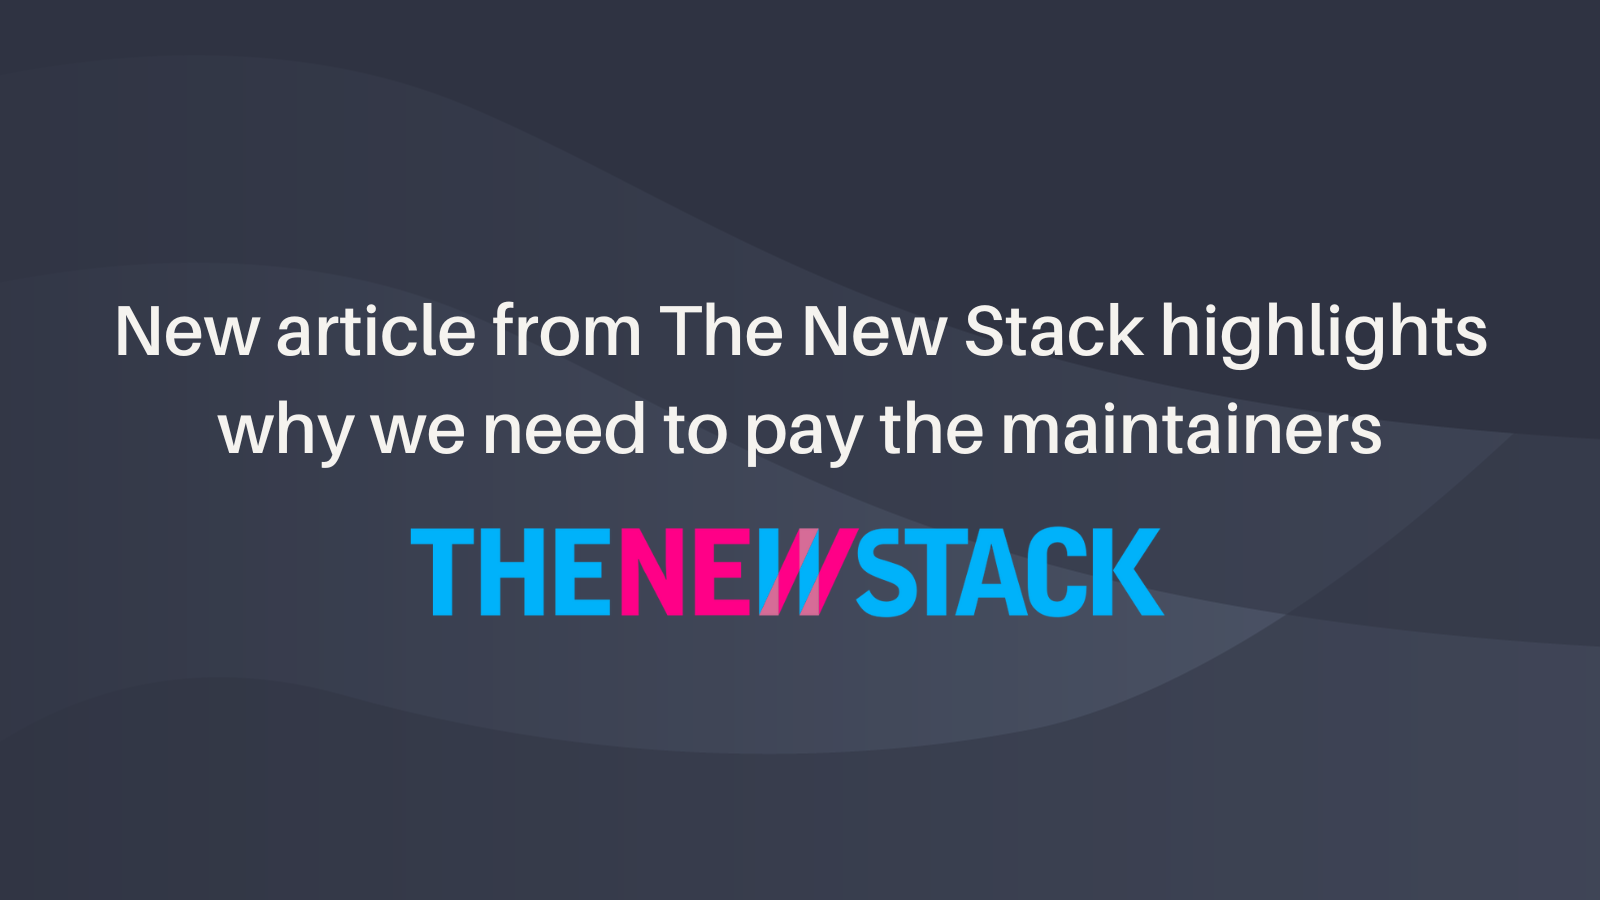 New article from The New Stack highlights why we need to pay the maintainers